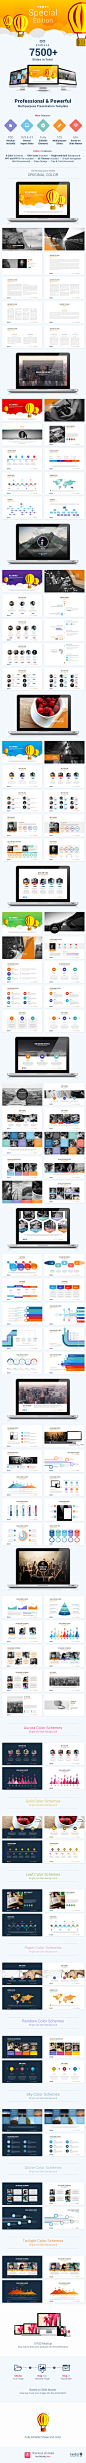 Powerful Business Presentation - Business PowerPoint Templates